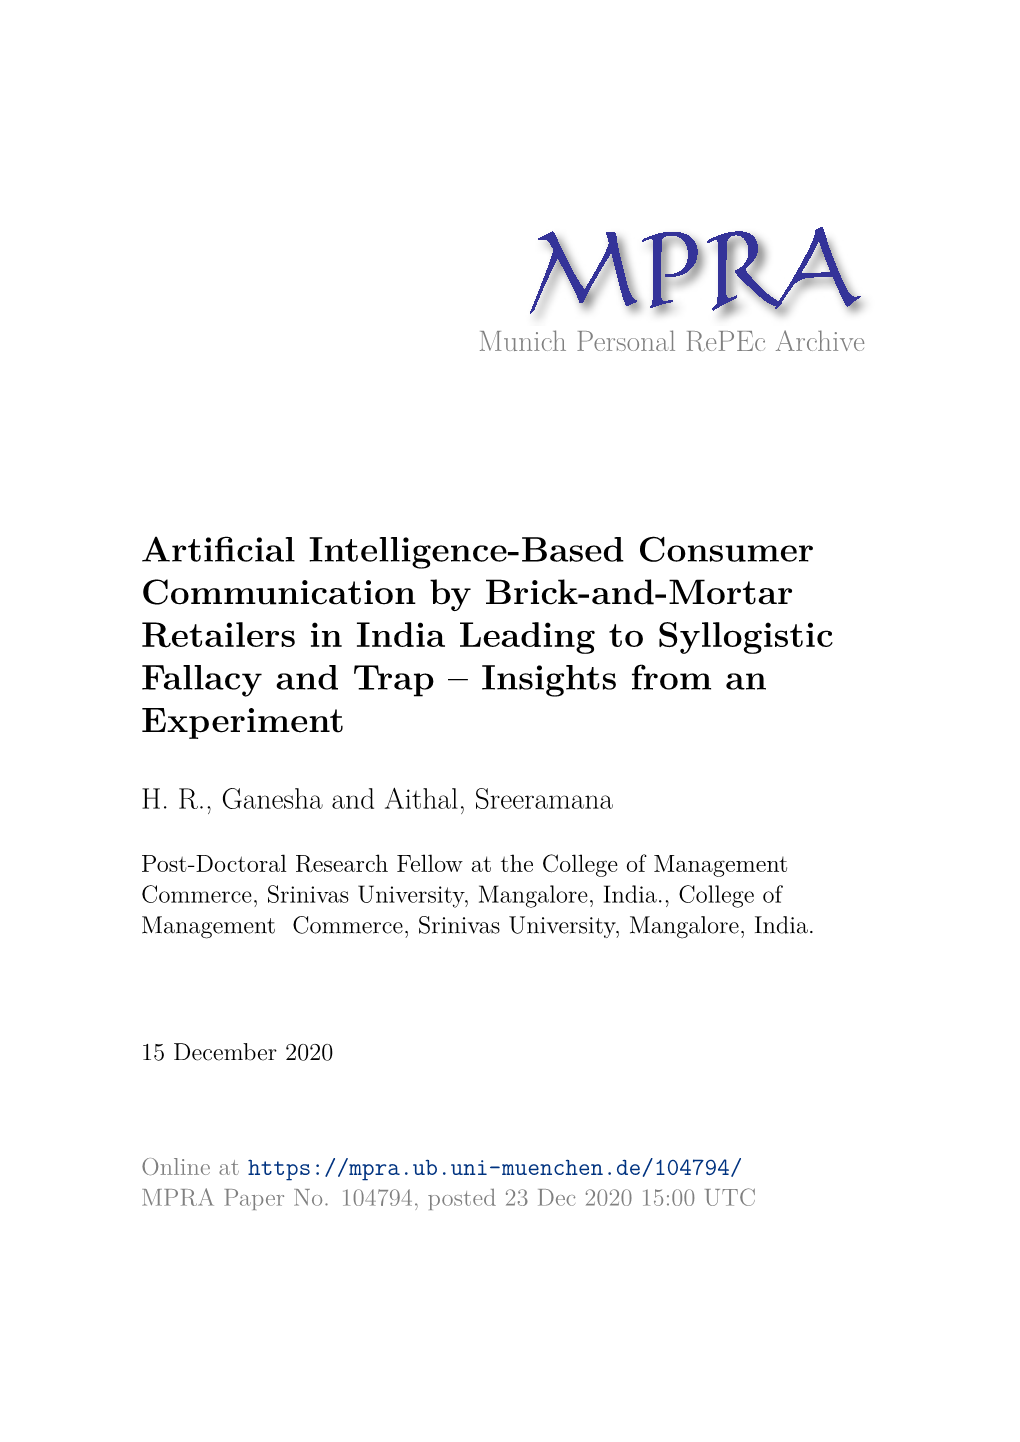 Artificial Intelligence-Based Consumer Communication by Brick-And-Mortar Retailers in India Leading to Syllogistic Fallacy and Trap – Insights from an Experiment